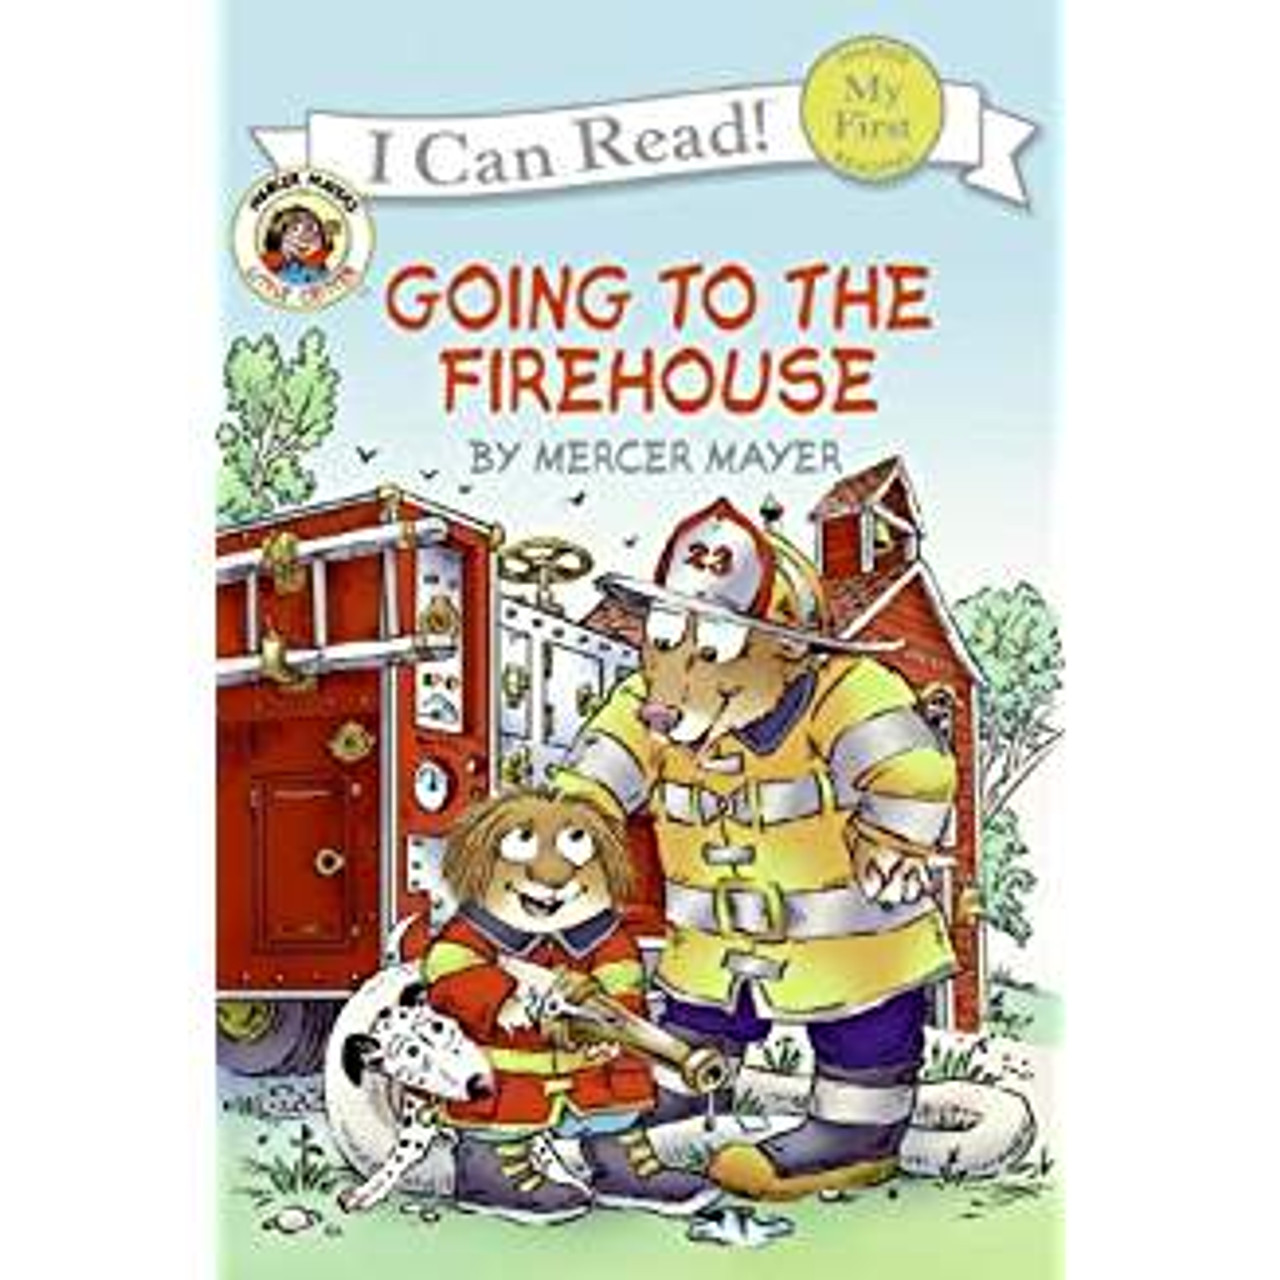 Little Critter and his classmates are visiting the firehouse, where Little Critter tries on boots and a jacket. Now he's ready to help Fireman Joe. But the most important part of being a fireman is knowing how to be safe when fighting a fire.